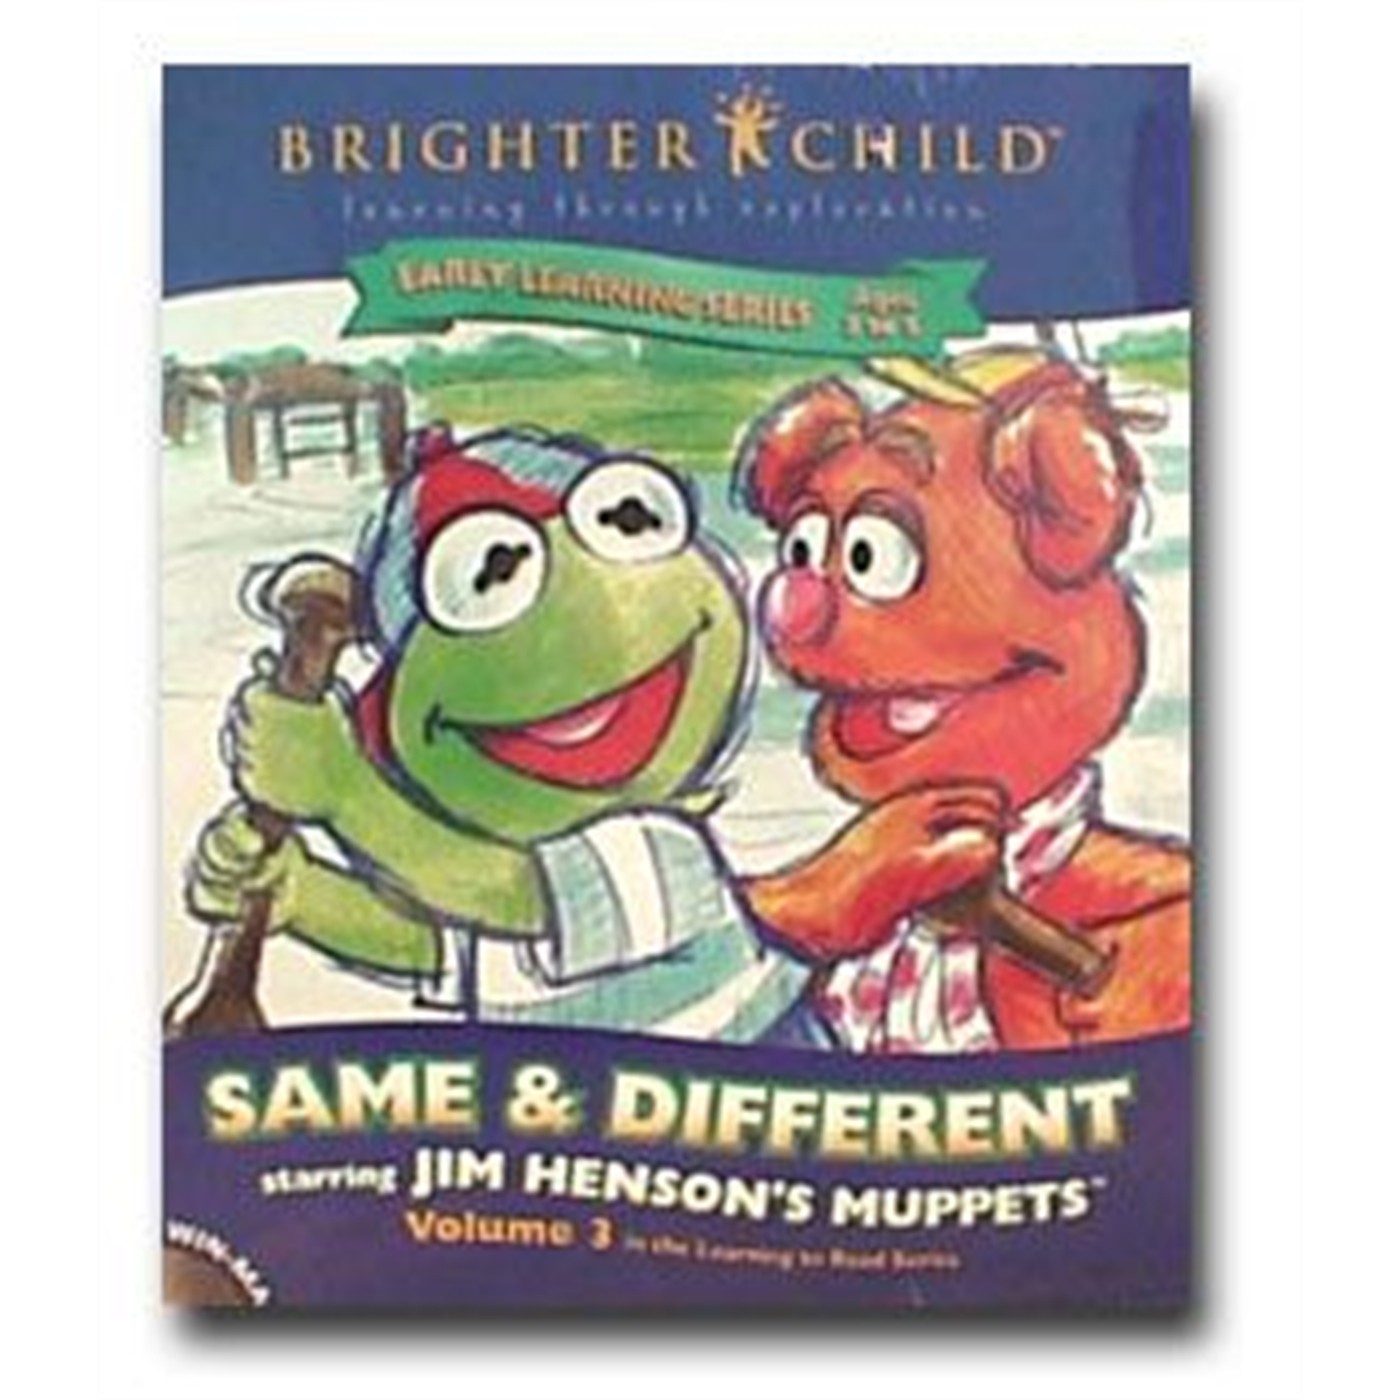 Muppets Software: Same & Different